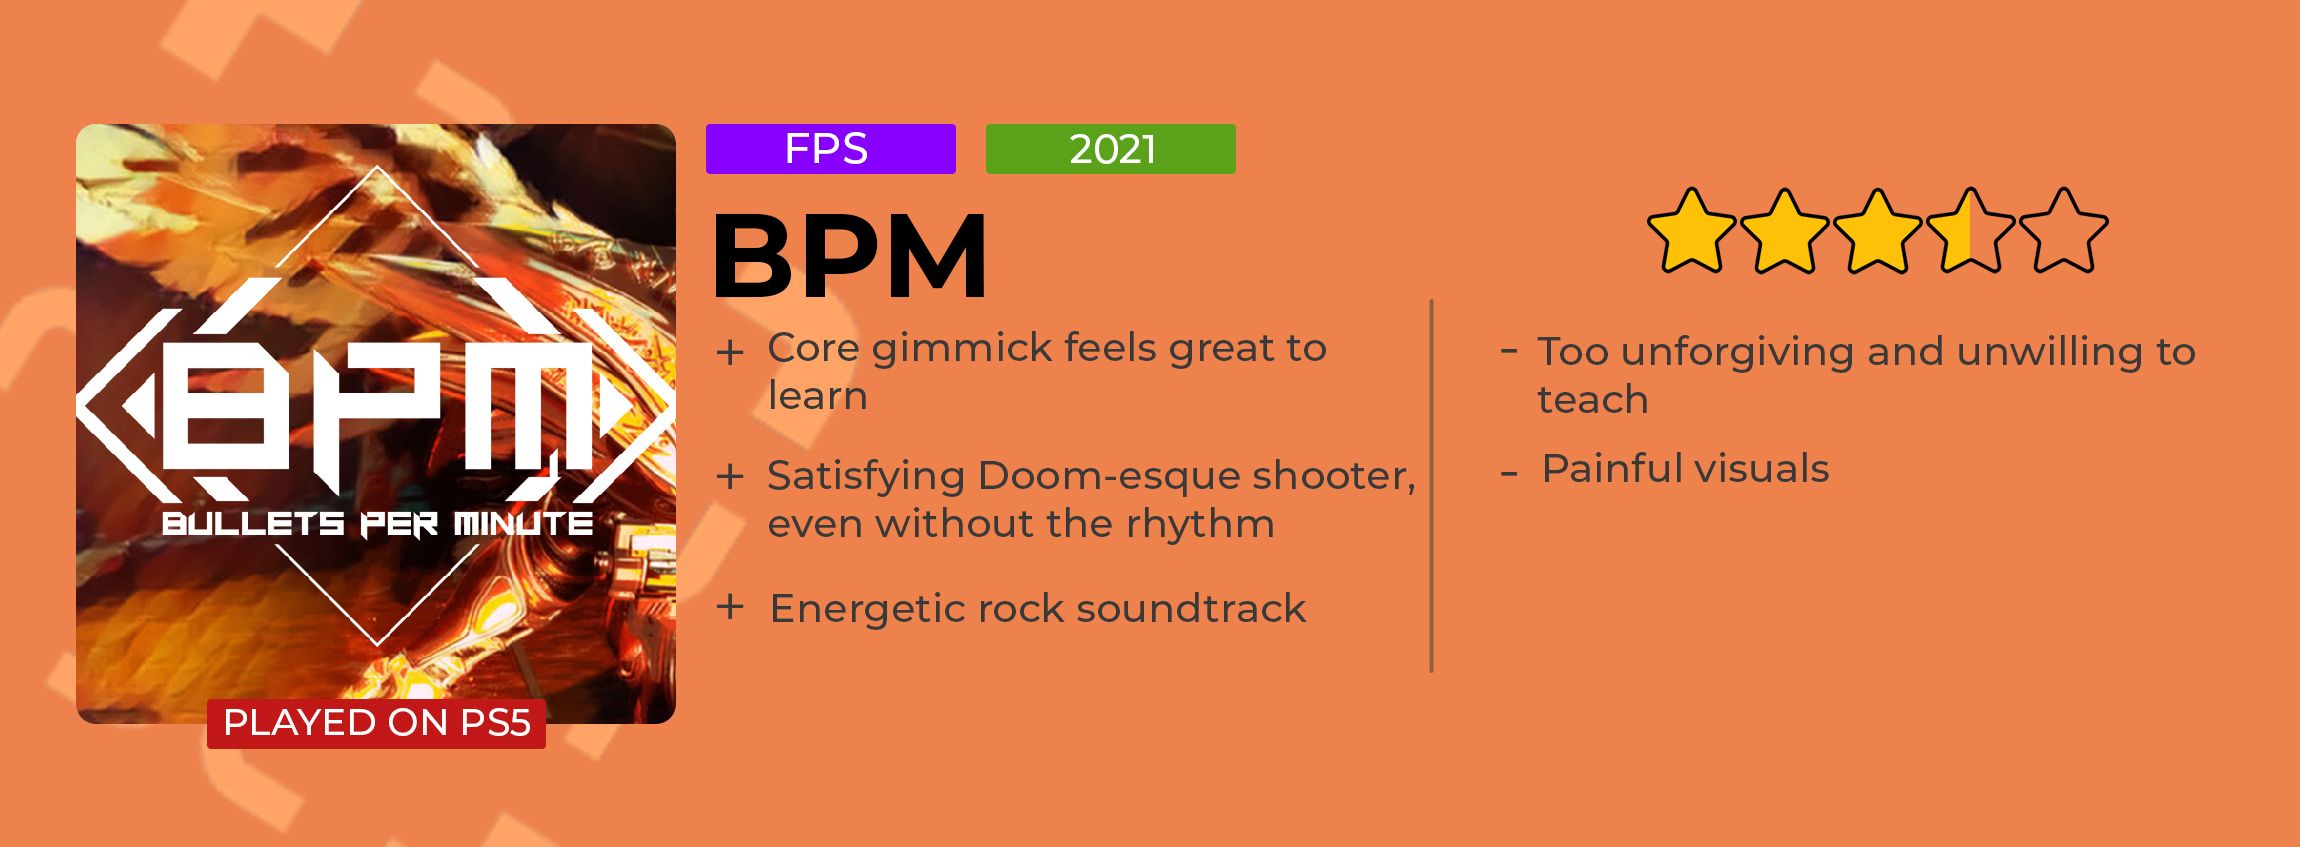 bpm review card